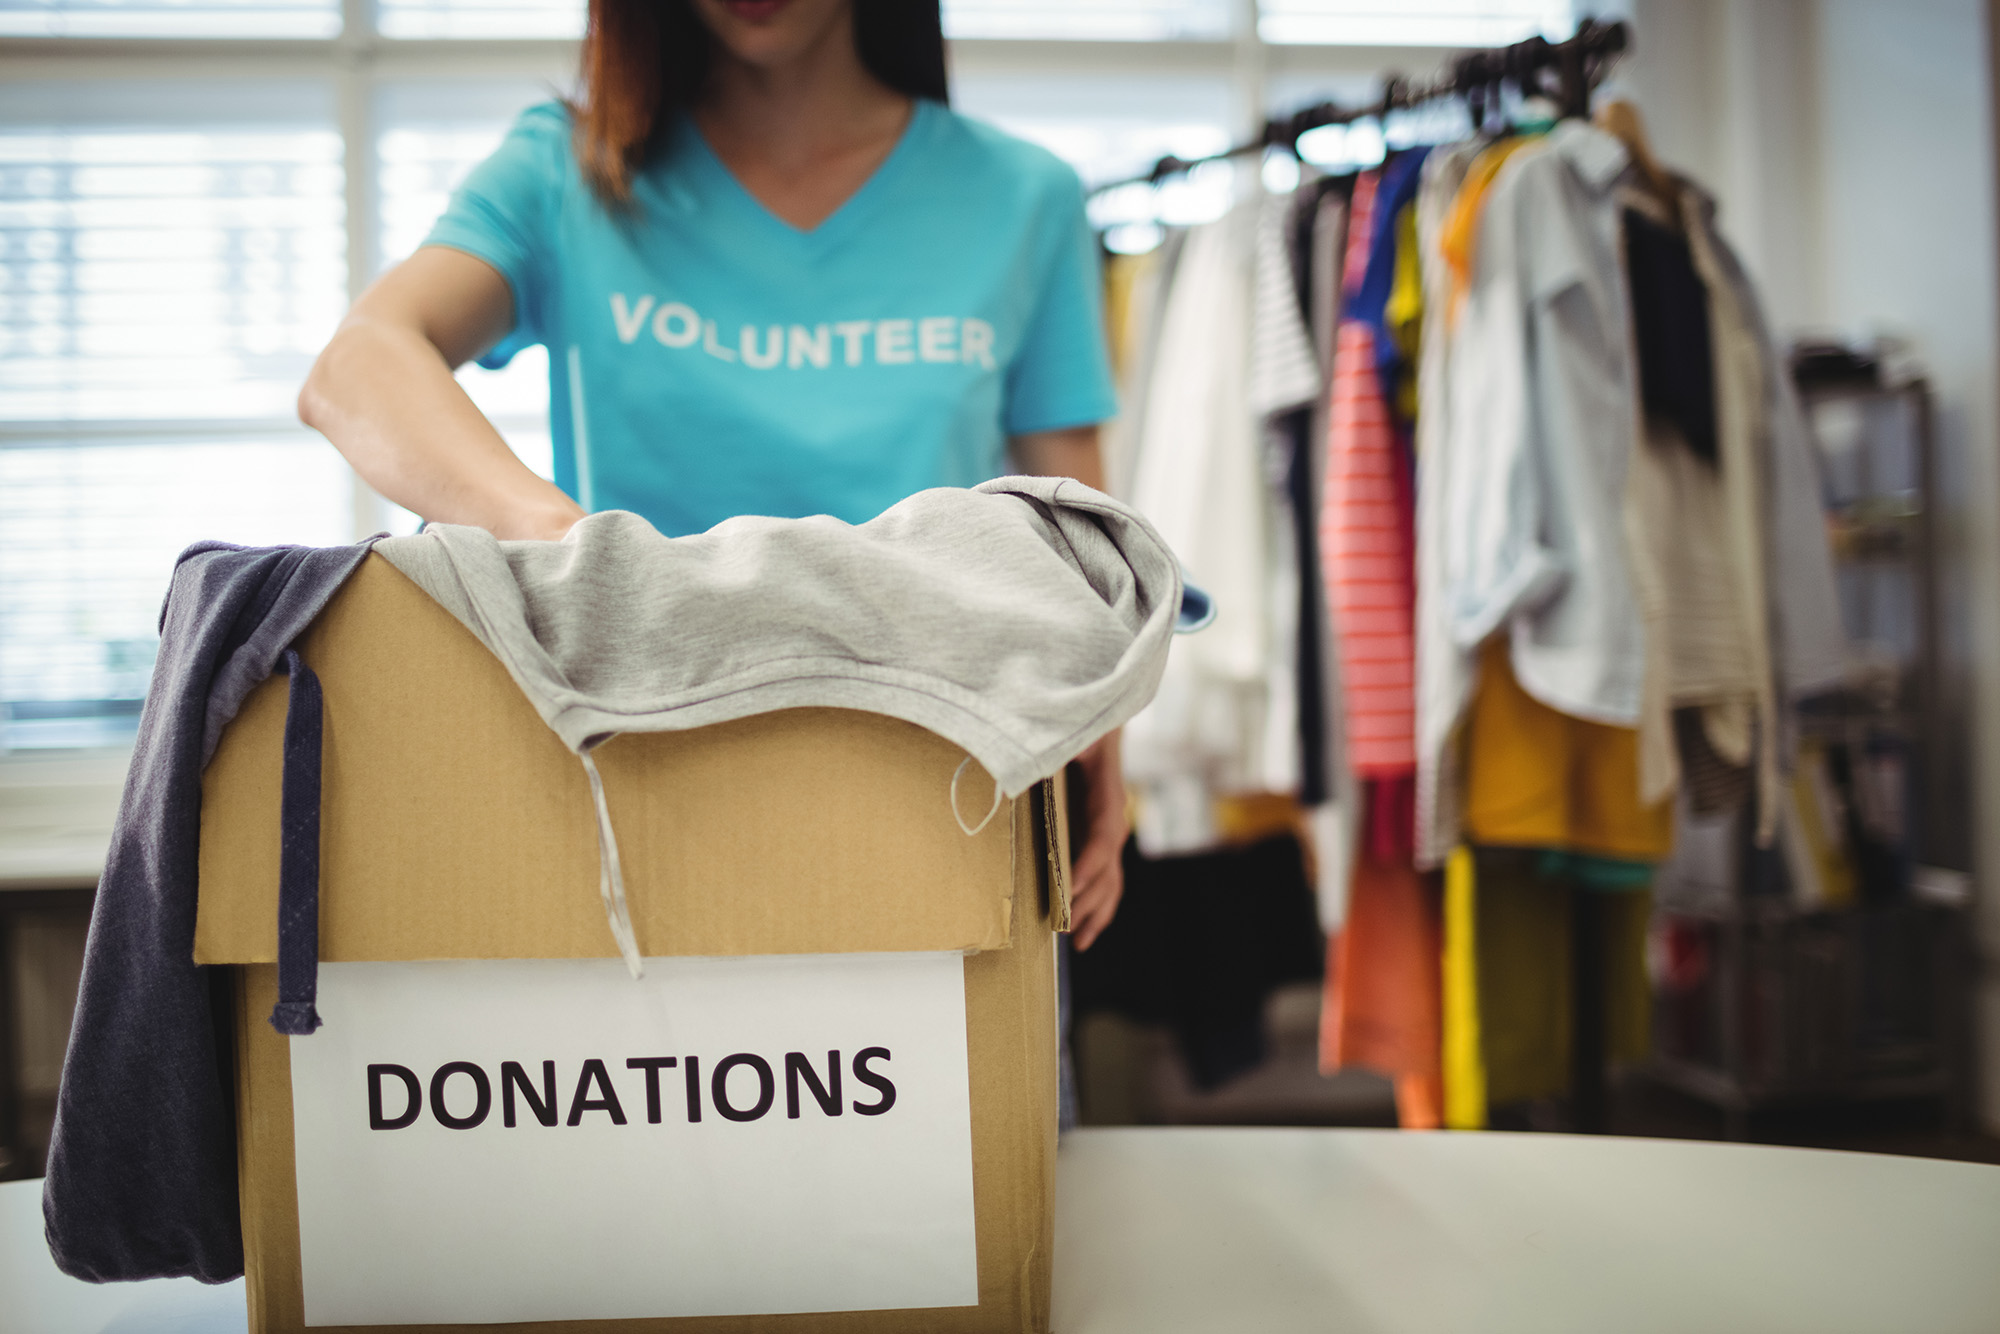 npo_intro (Female volunteer holding clothes in donation box)